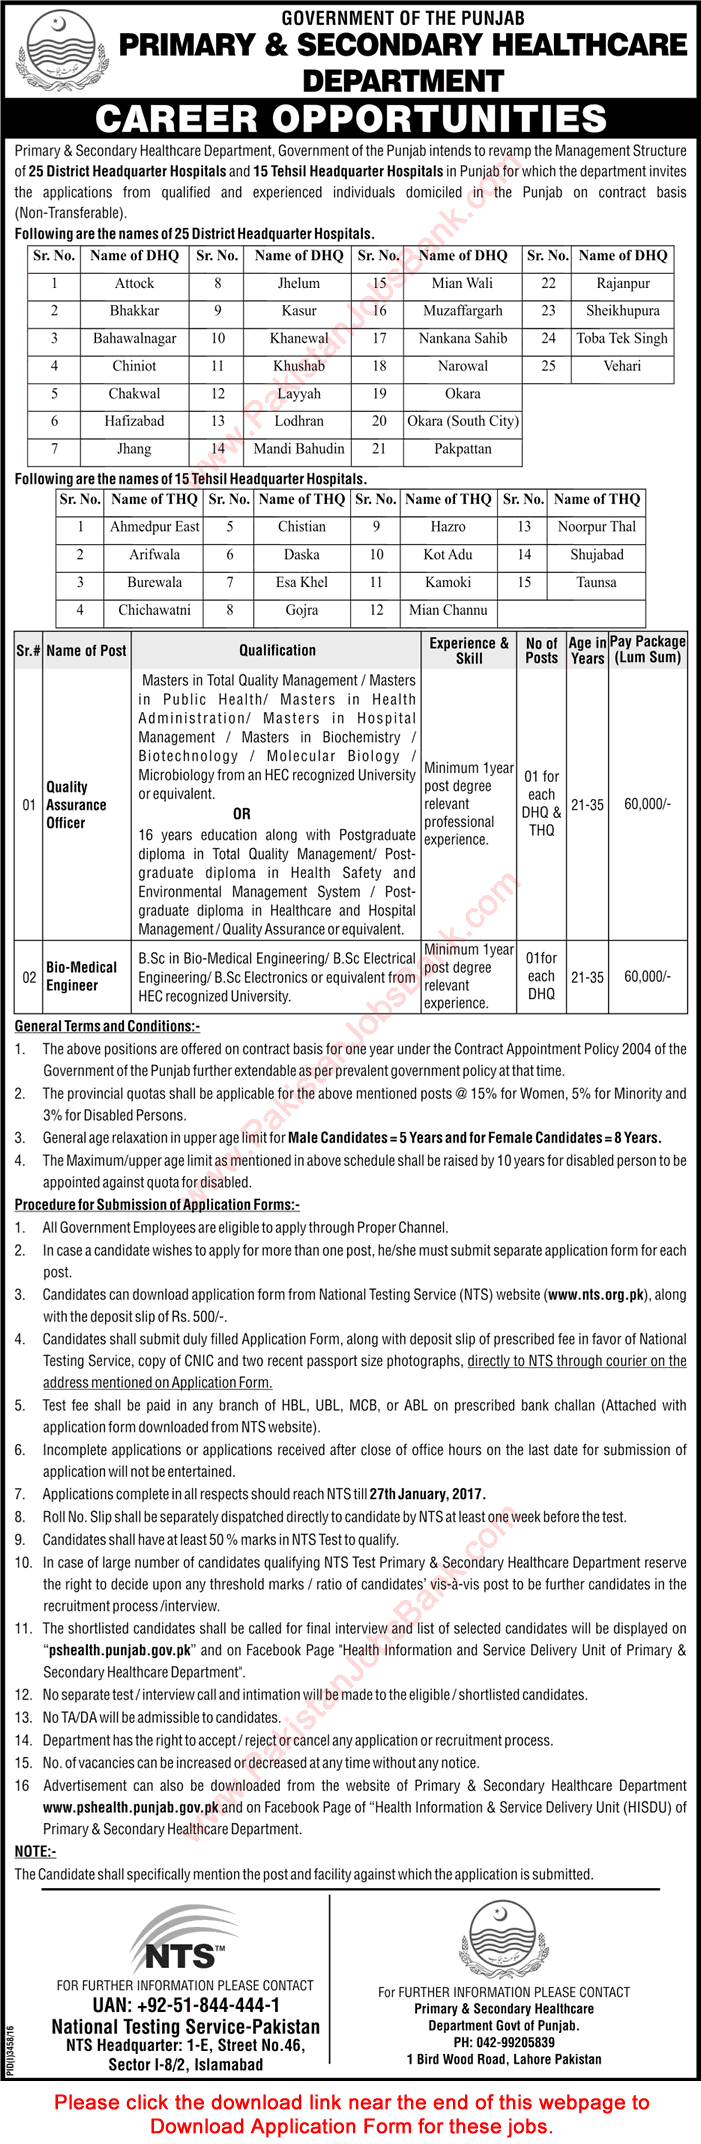 Primary and Secondary Healthcare Department Punjab Jobs 2017 QA Officers & Bio Medical Engineers NTS Application Form Latest